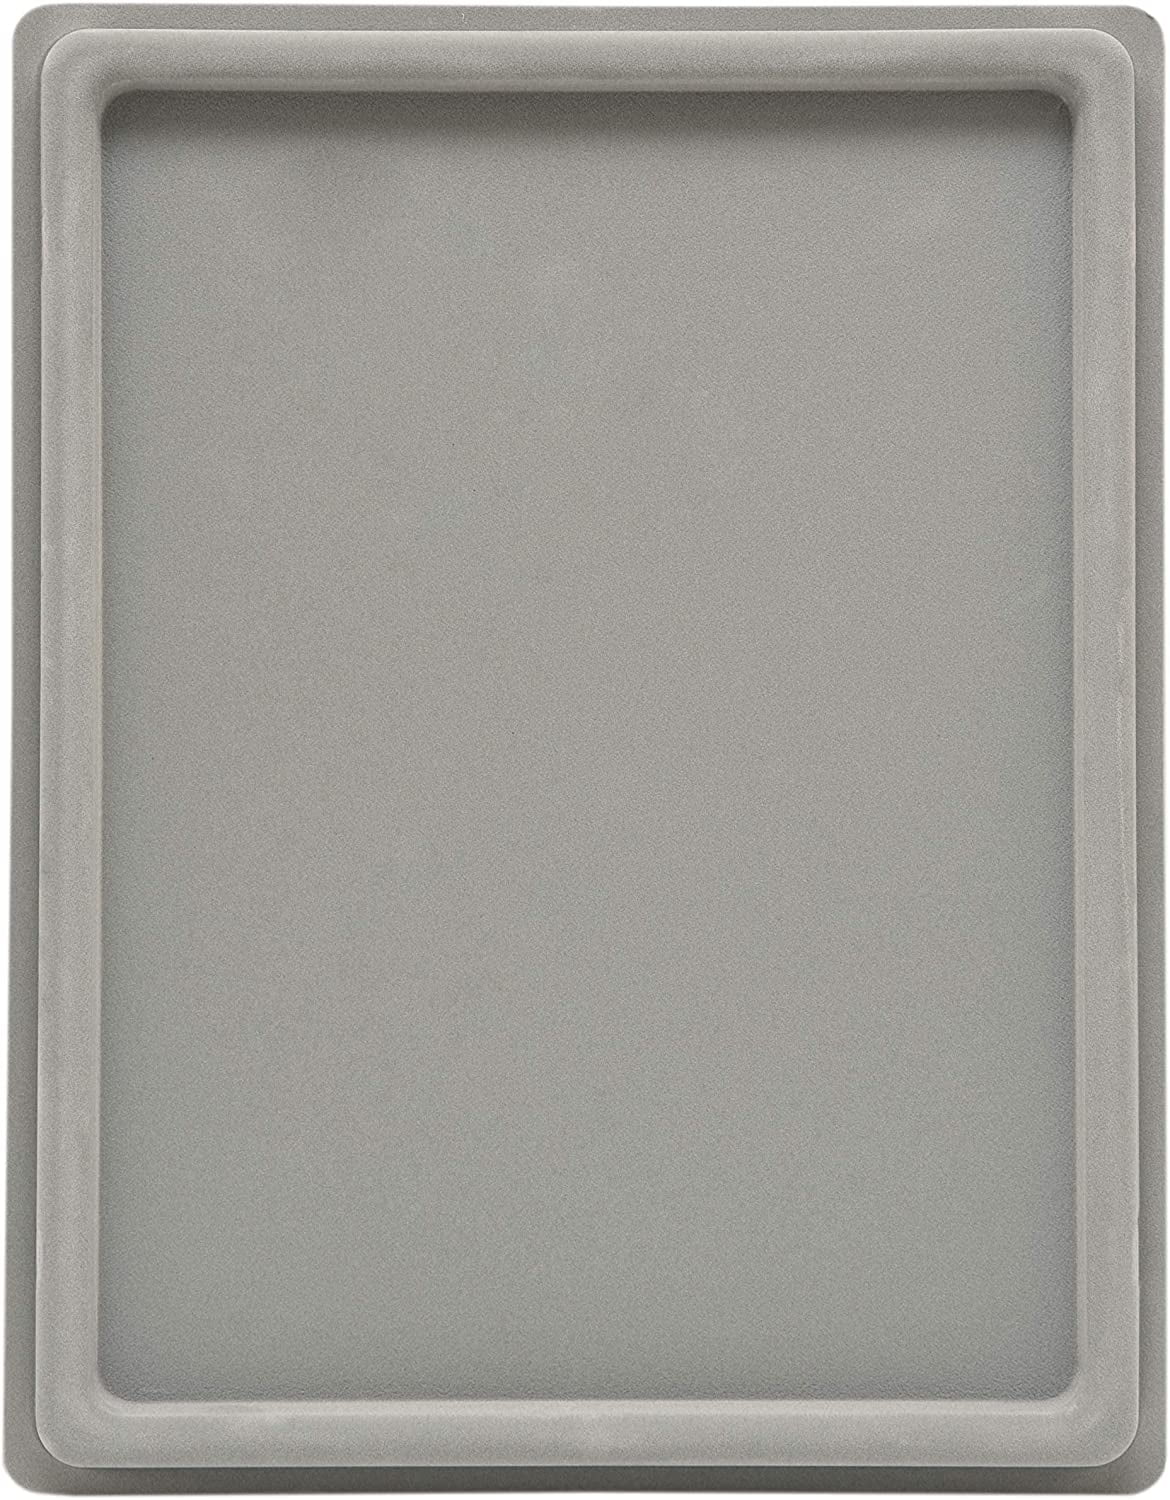 Beadsmith Bead Design Beading Board Tray Gray Flock with Lid Set, 9.25x12.5  Inches — Beadaholique